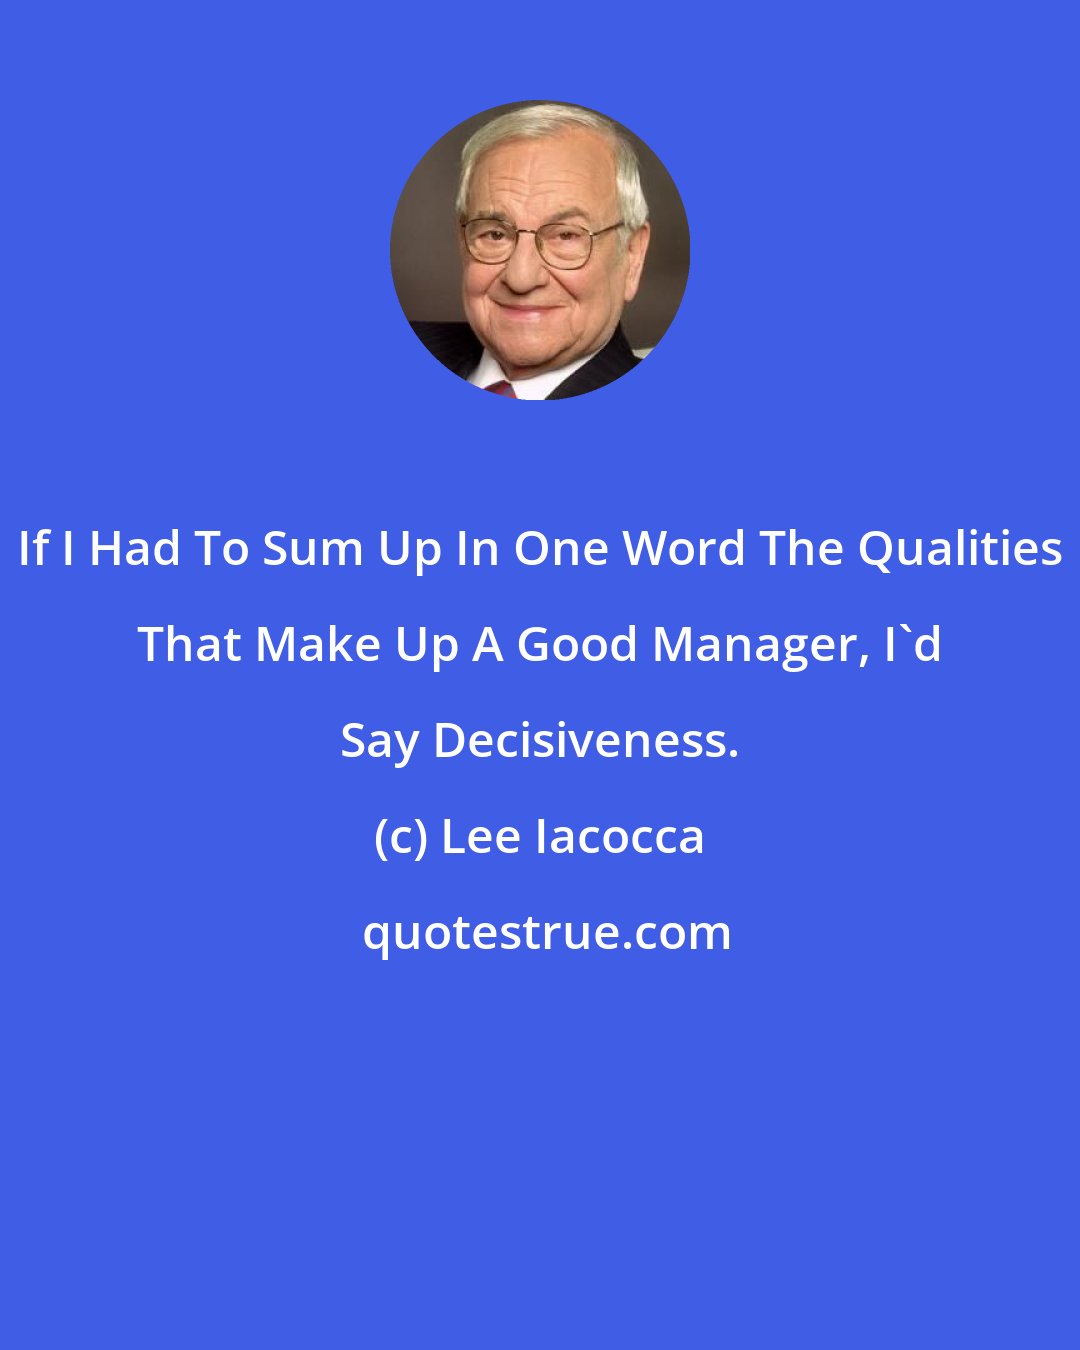 Lee Iacocca: If I Had To Sum Up In One Word The Qualities That Make Up A Good Manager, I'd Say Decisiveness.